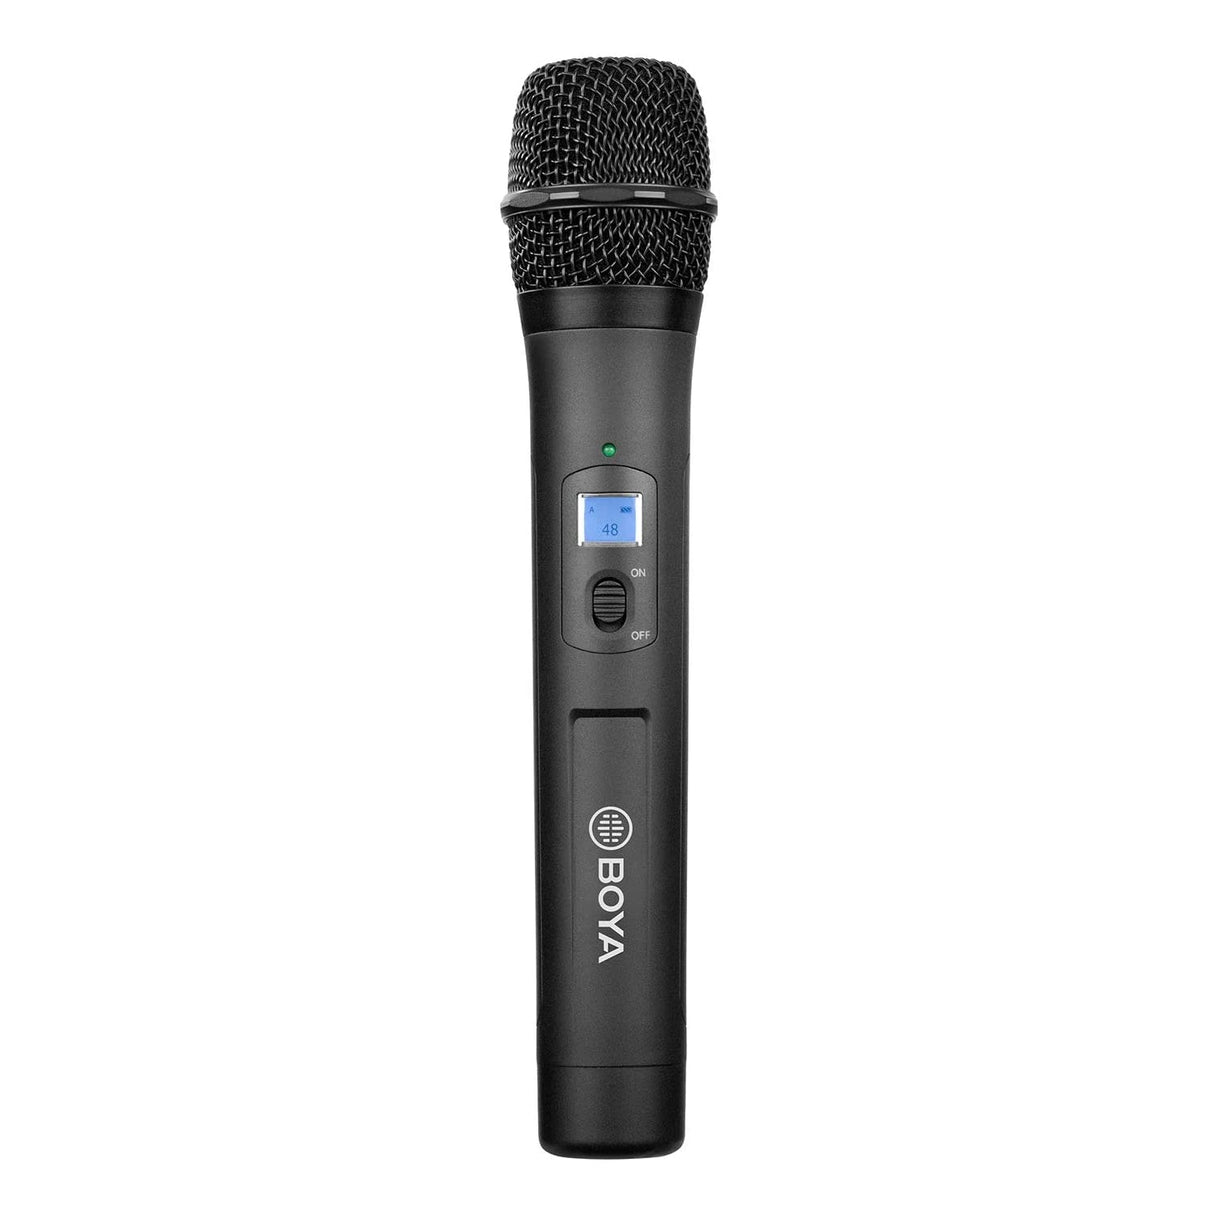 BOYA by-WHM8 Pro 48-Channel UHF Wireless Dynamic Handheld Cardioid Microphone Transmitter for by-WM8 Pro Series Microphone System for Interview Presentation Talk Show Speech